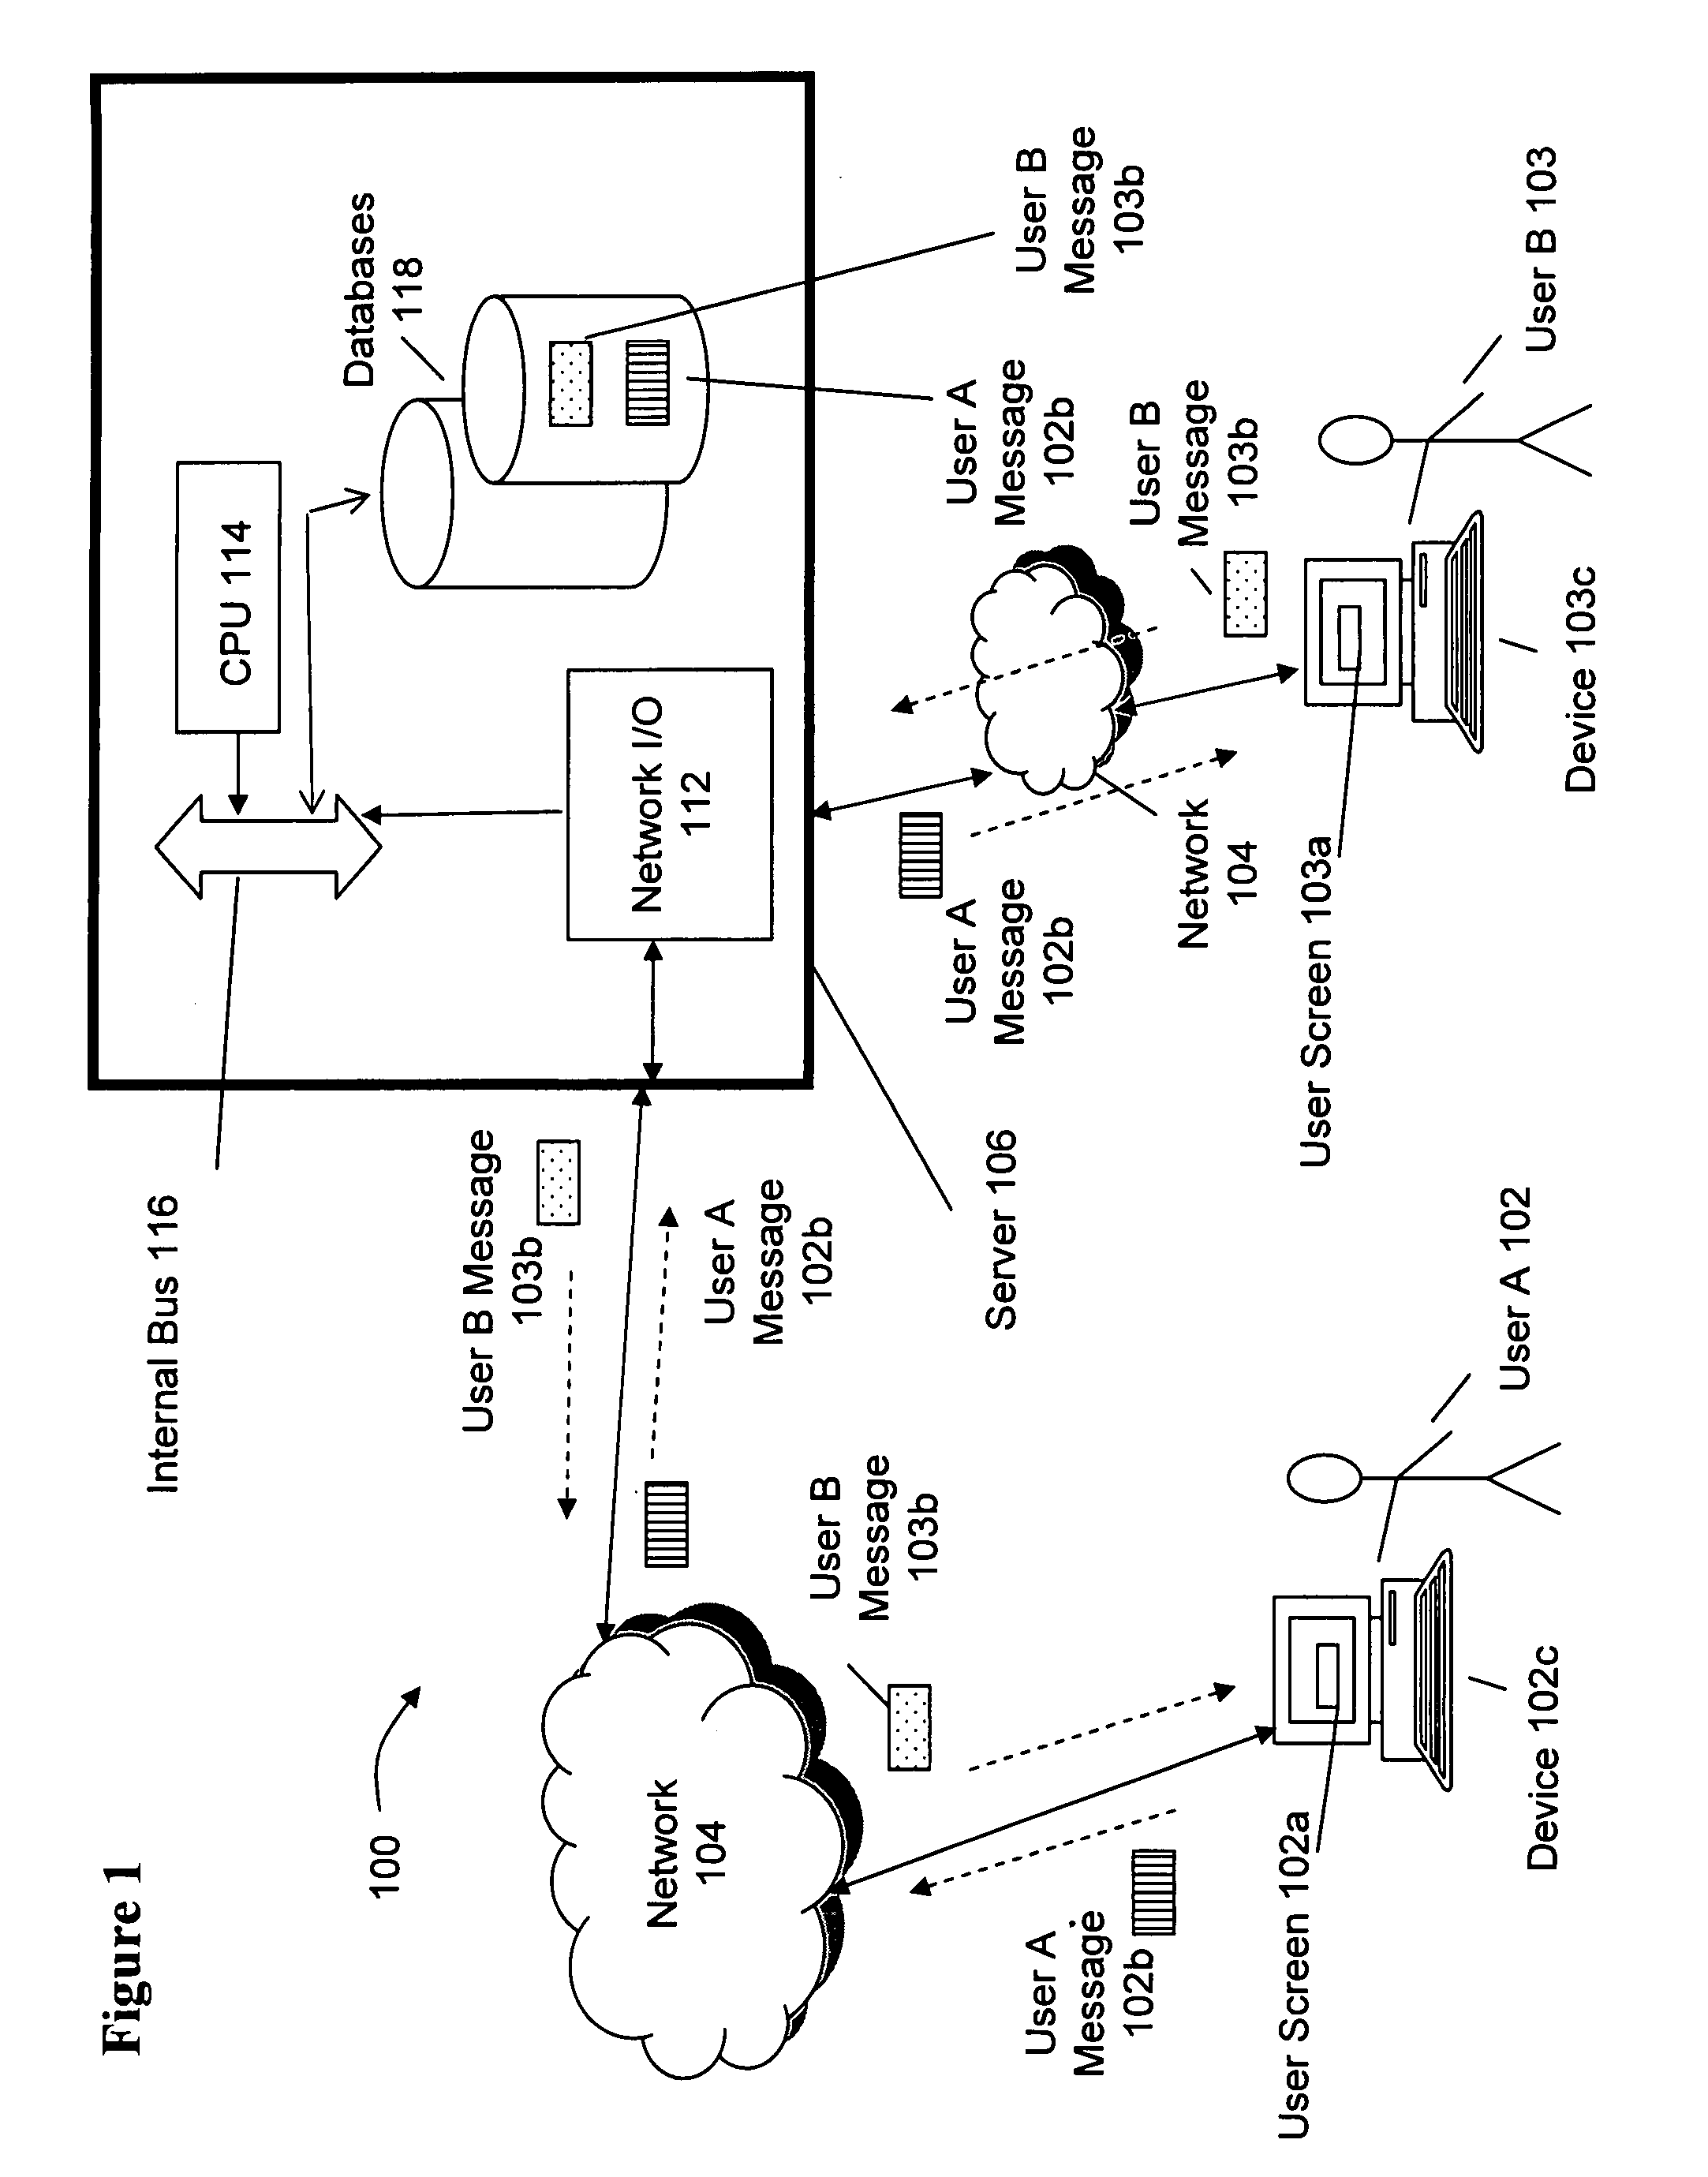 System and method for combining instant messaging with email in one client interface